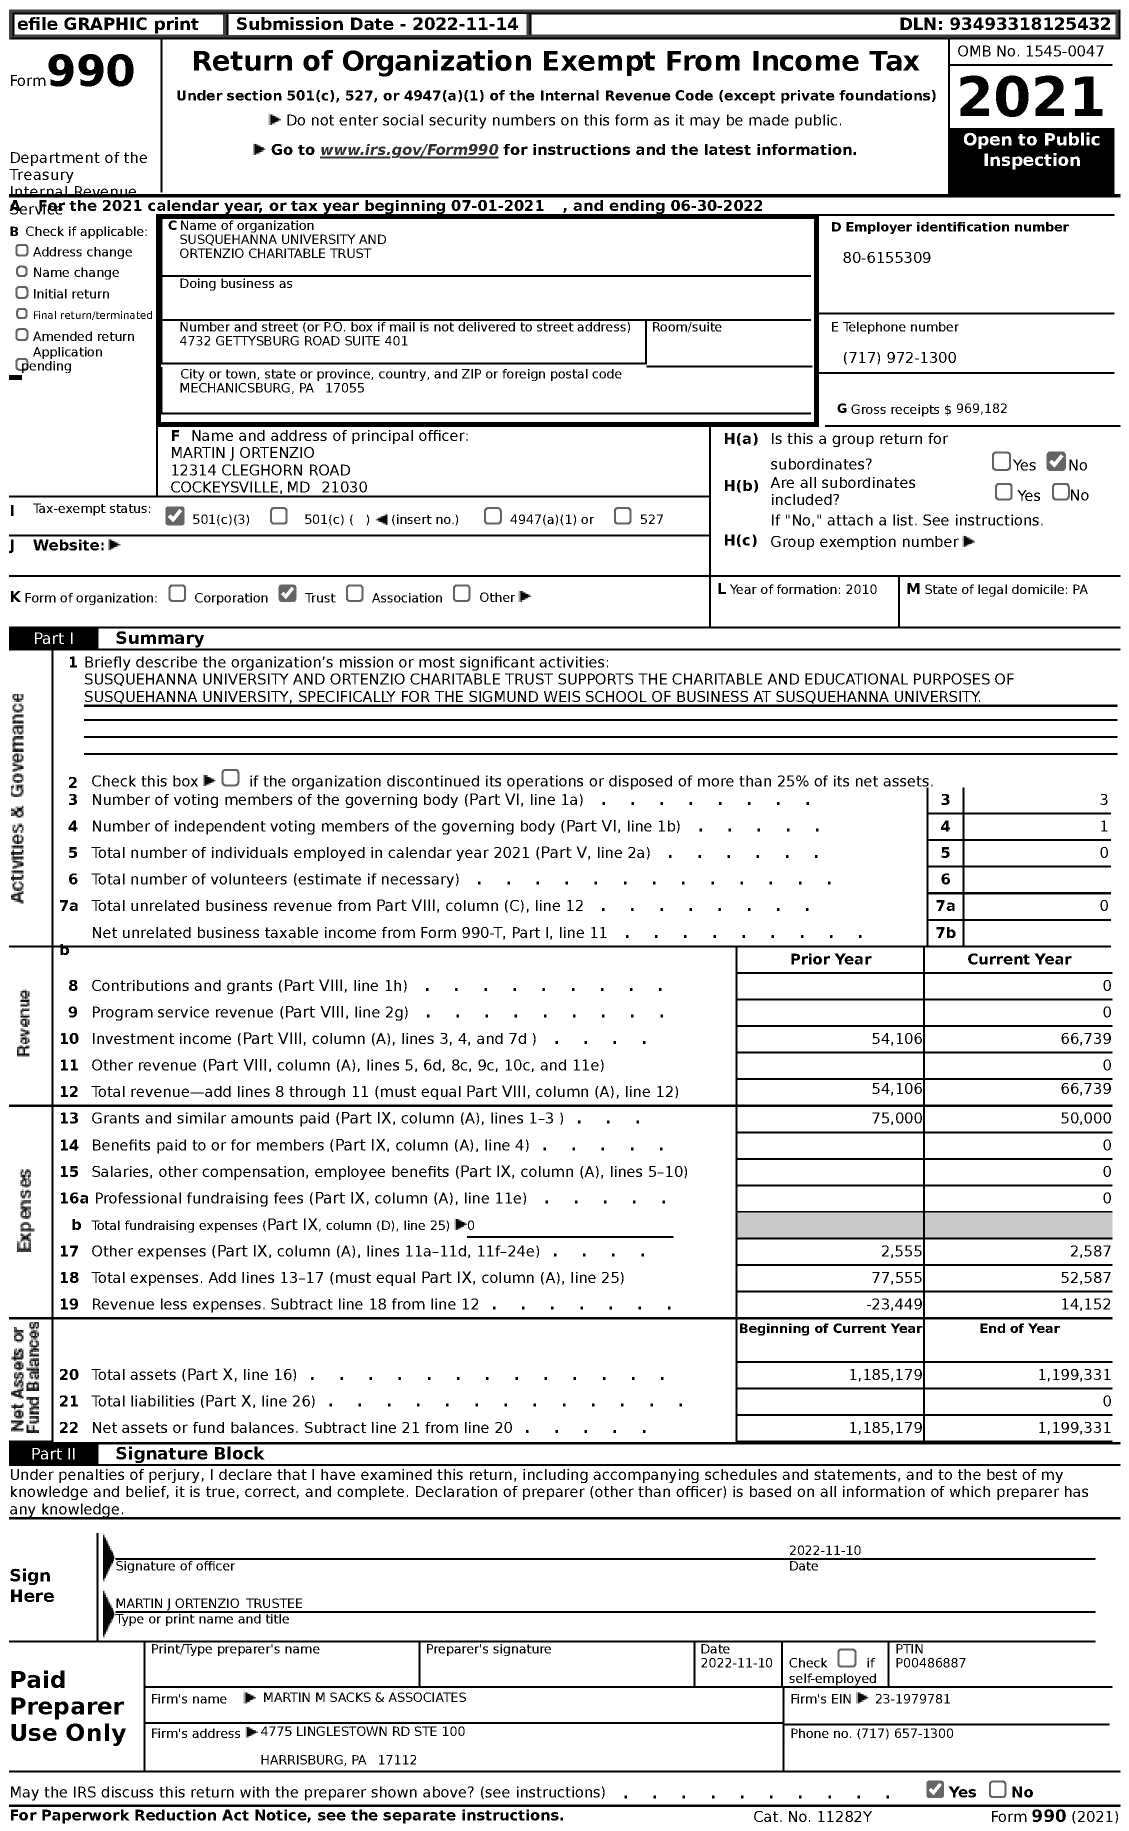 Image of first page of 2021 Form 990 for Susquehanna University and Ortenzio Charitable Trust